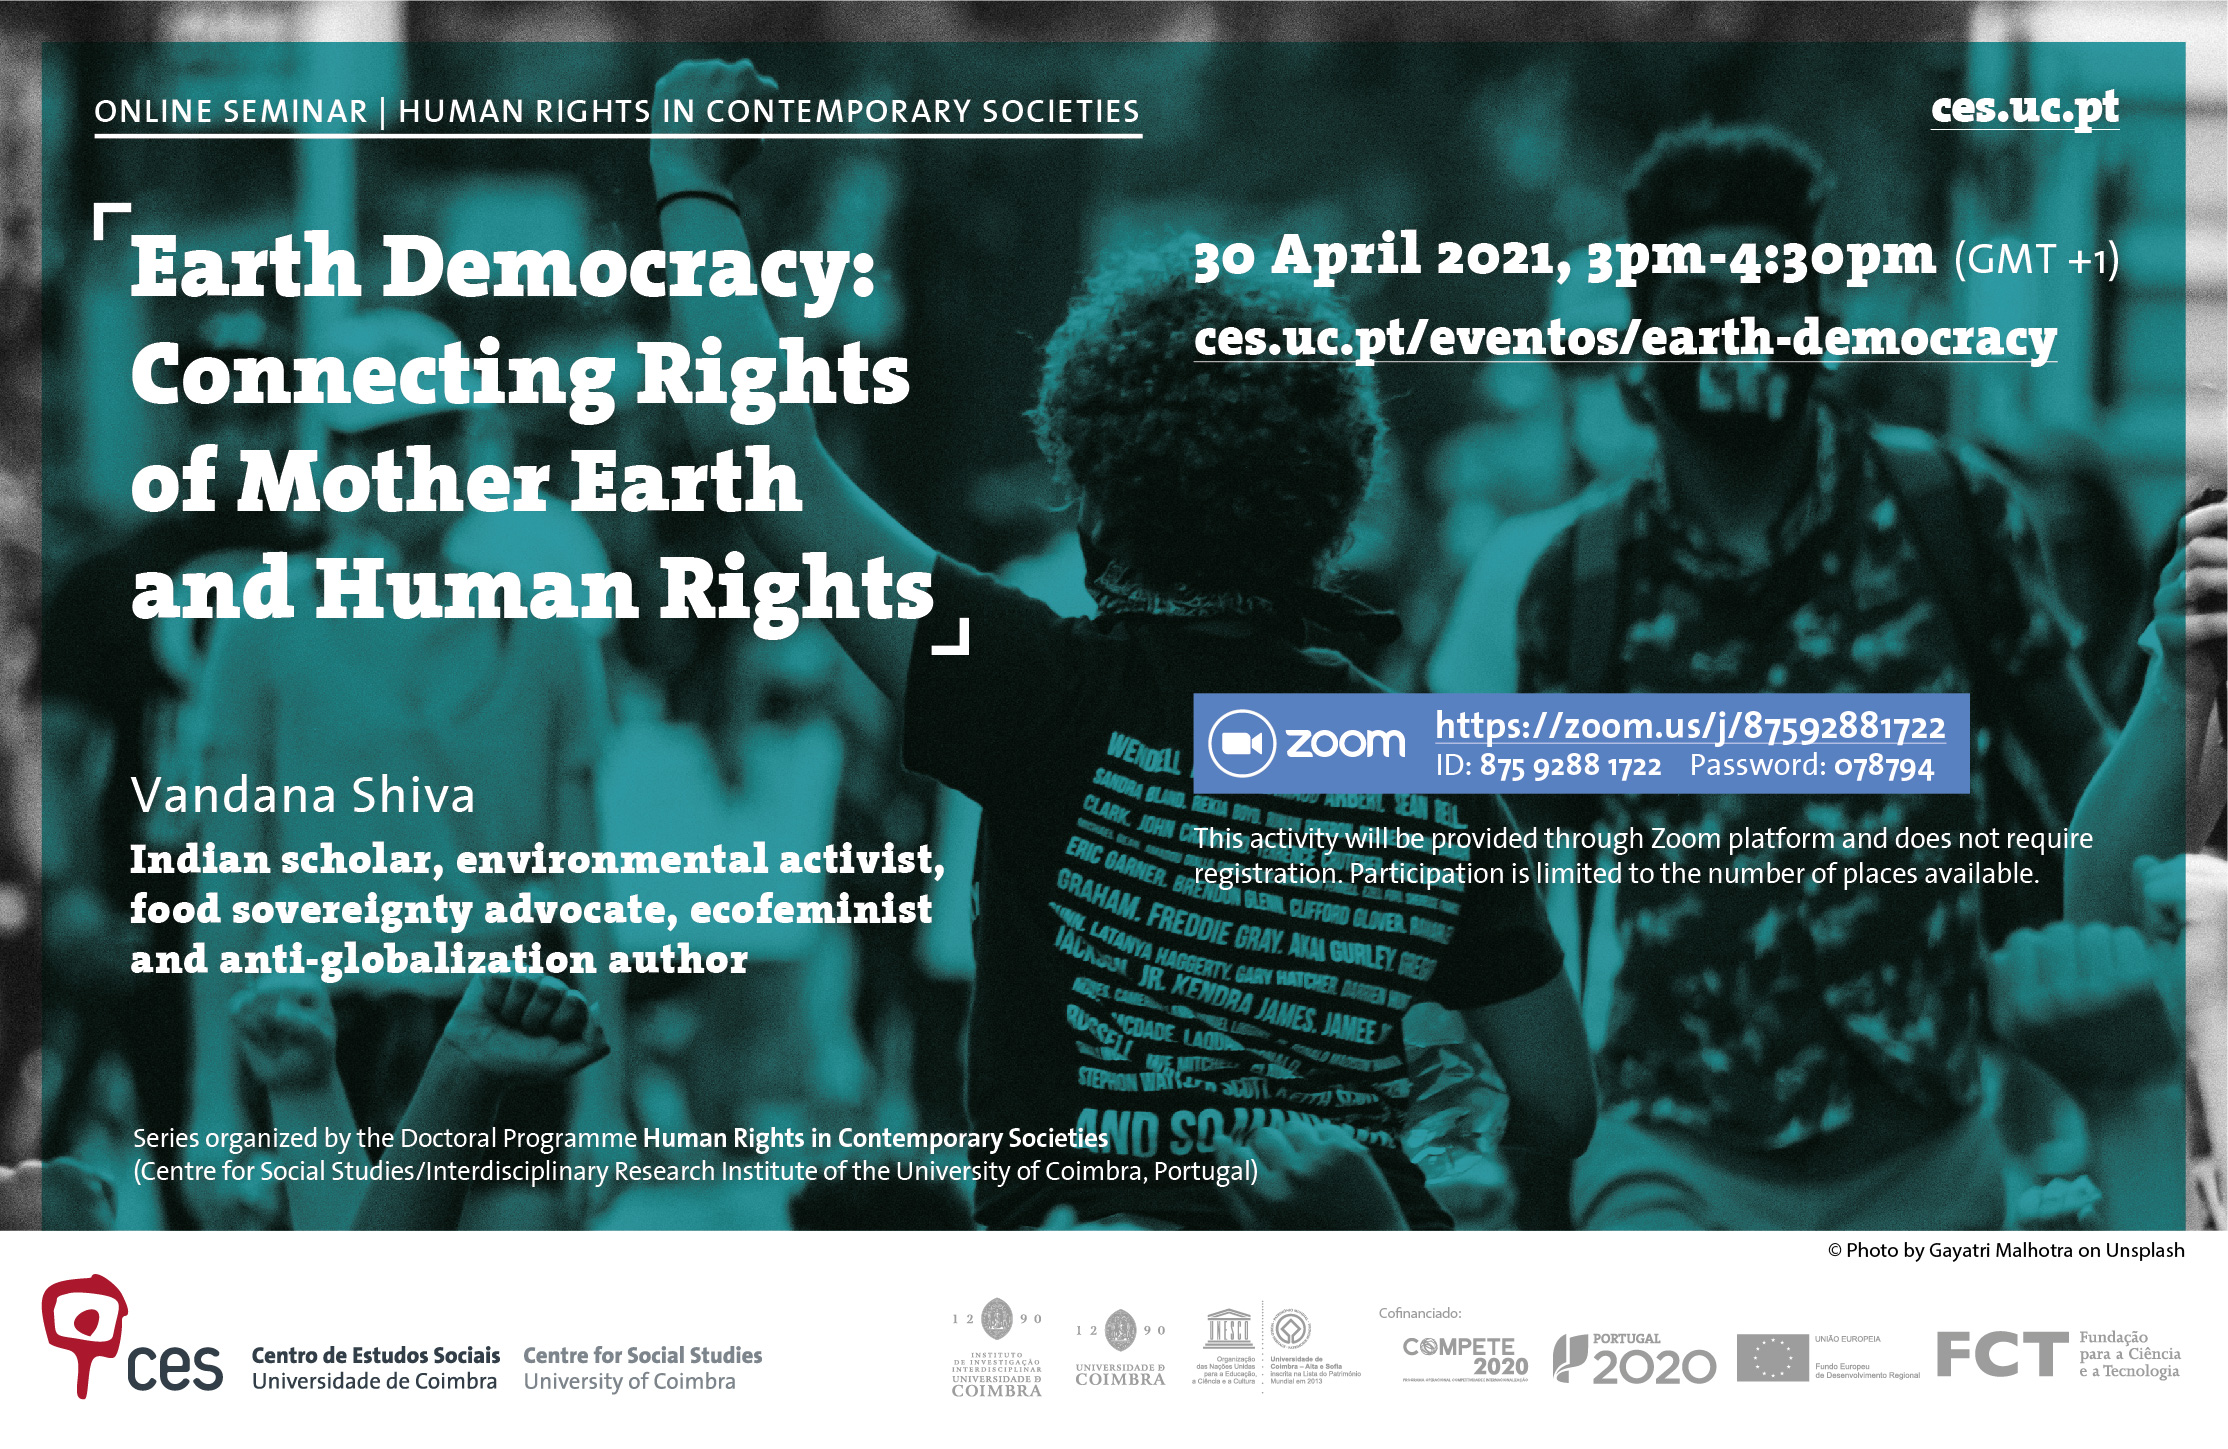 Earth Democracy: Connecting Rights of Mother Earth and Human Rights<span id="edit_33796"><script>$(function() { $('#edit_33796').load( "/myces/user/editobj.php?tipo=evento&id=33796" ); });</script></span>